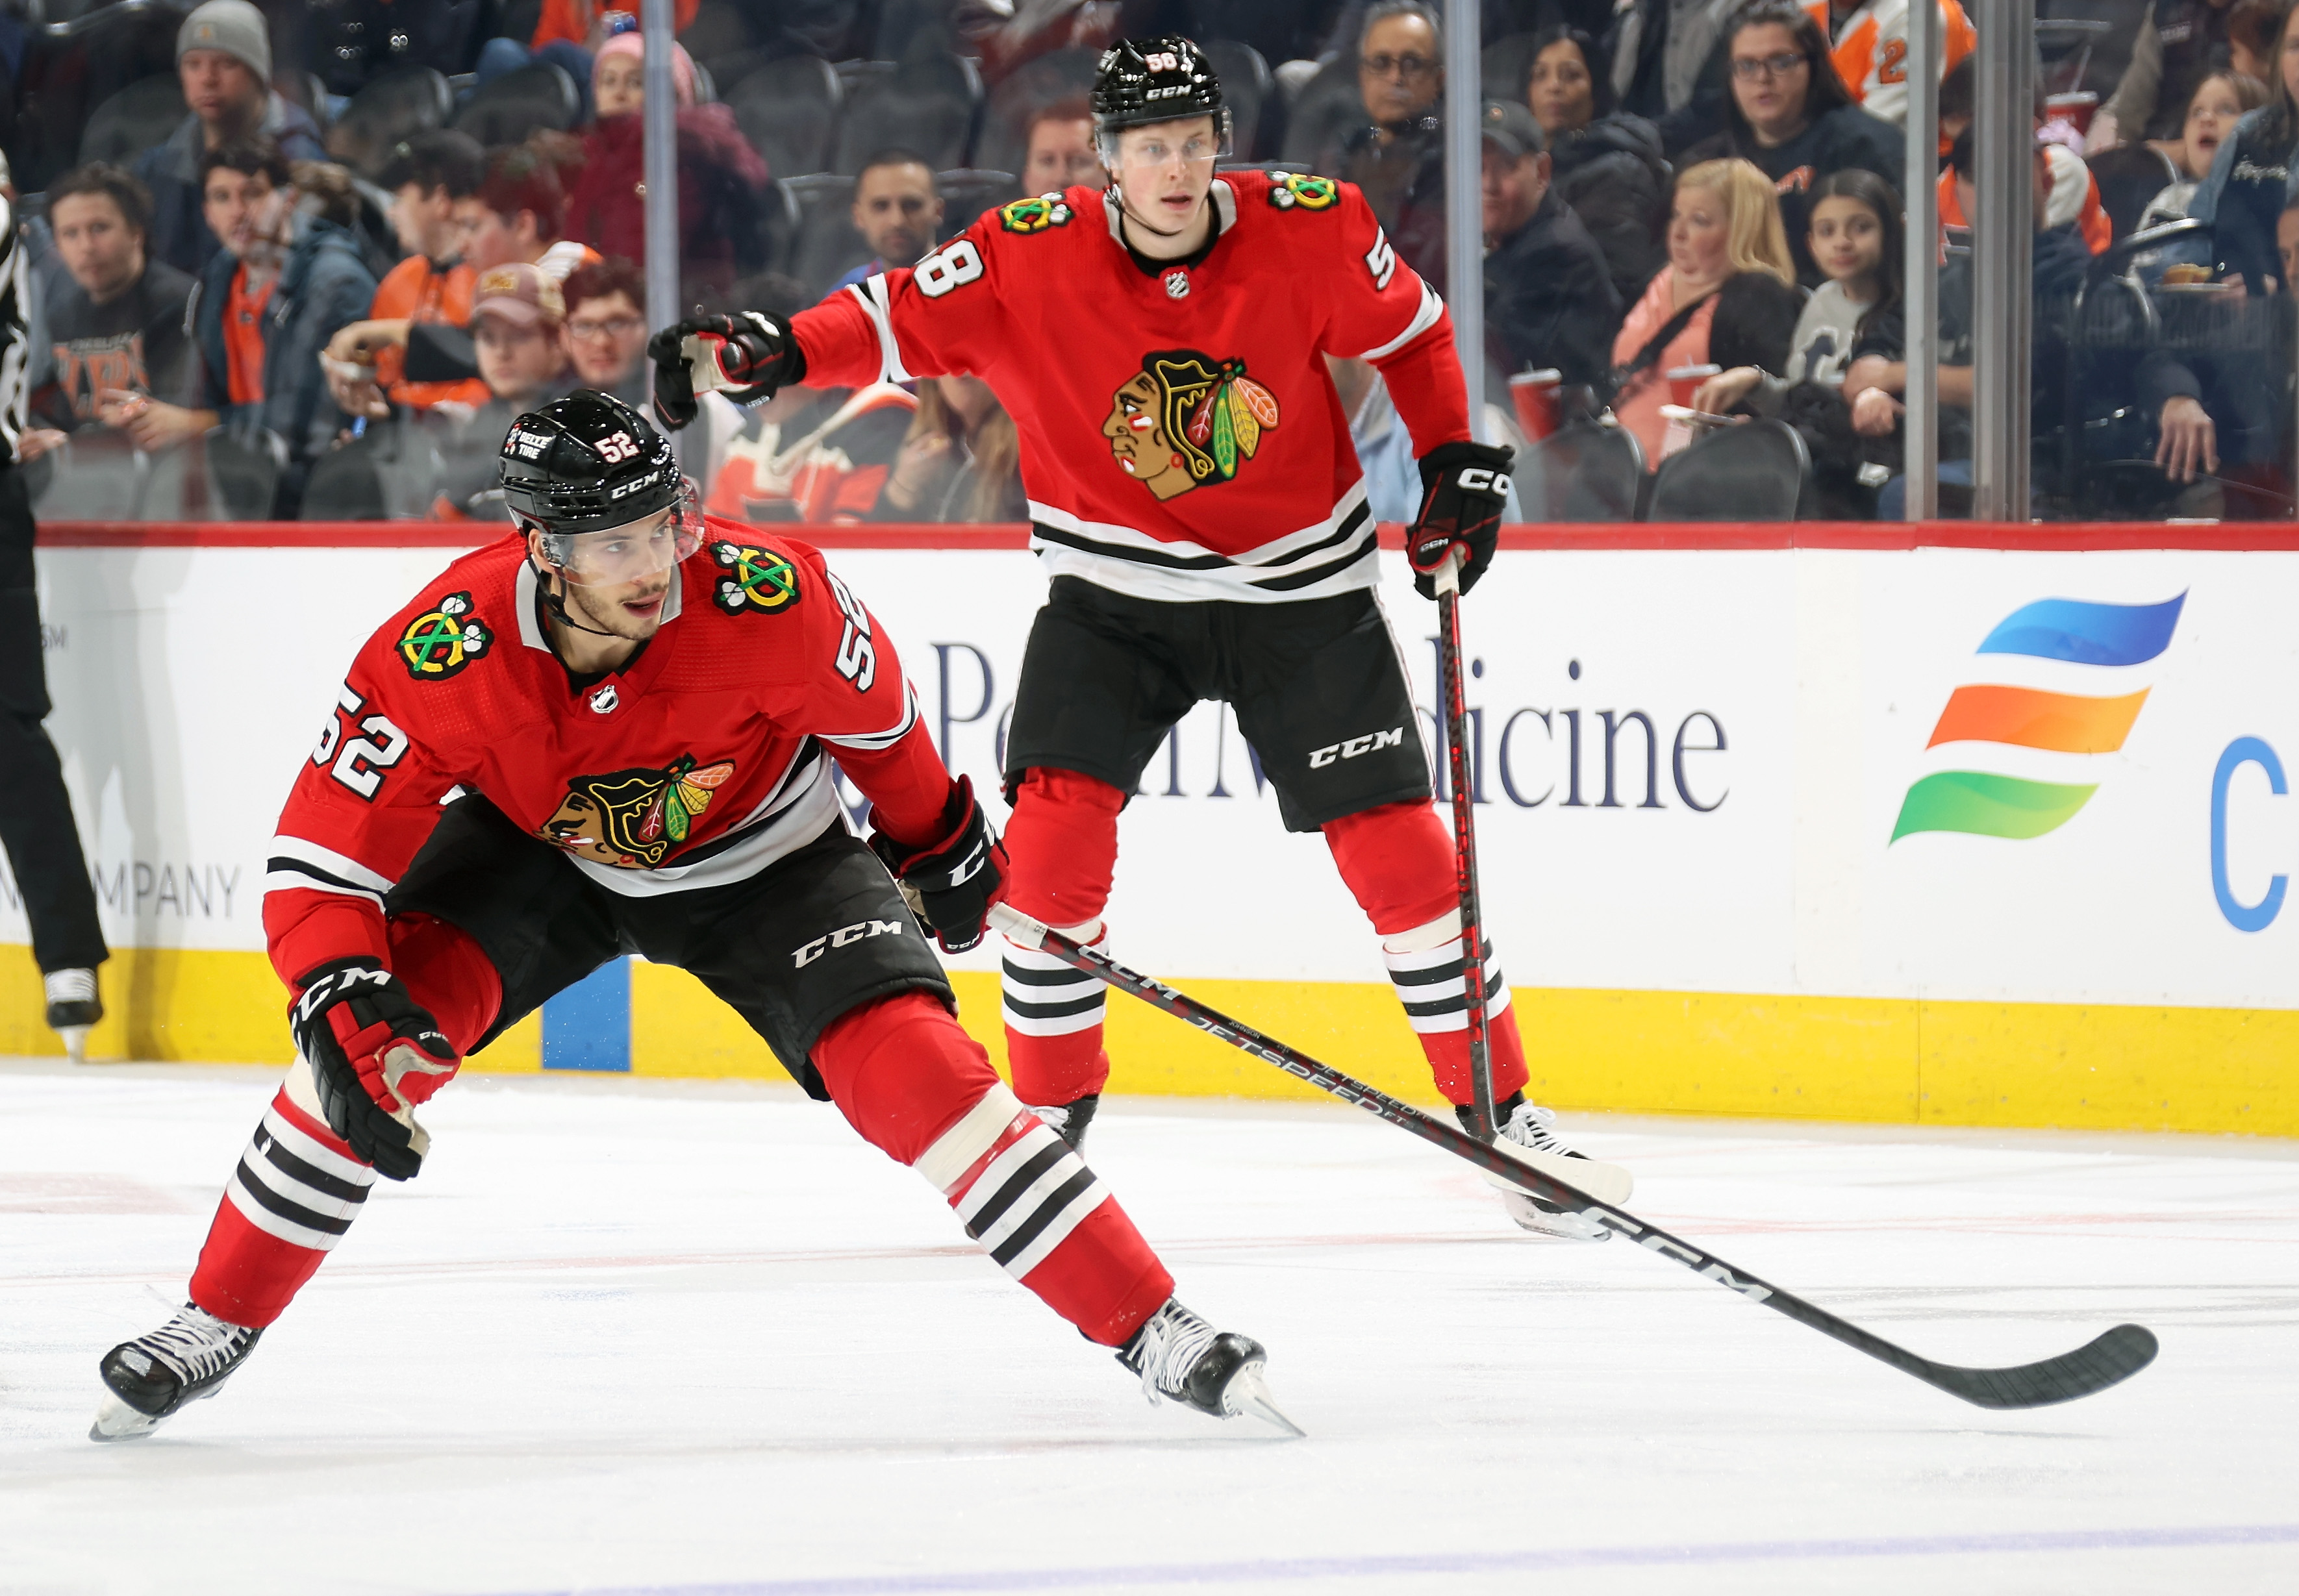 Blackhawks training camp: Five storylines to follow - Chicago Sun-Times